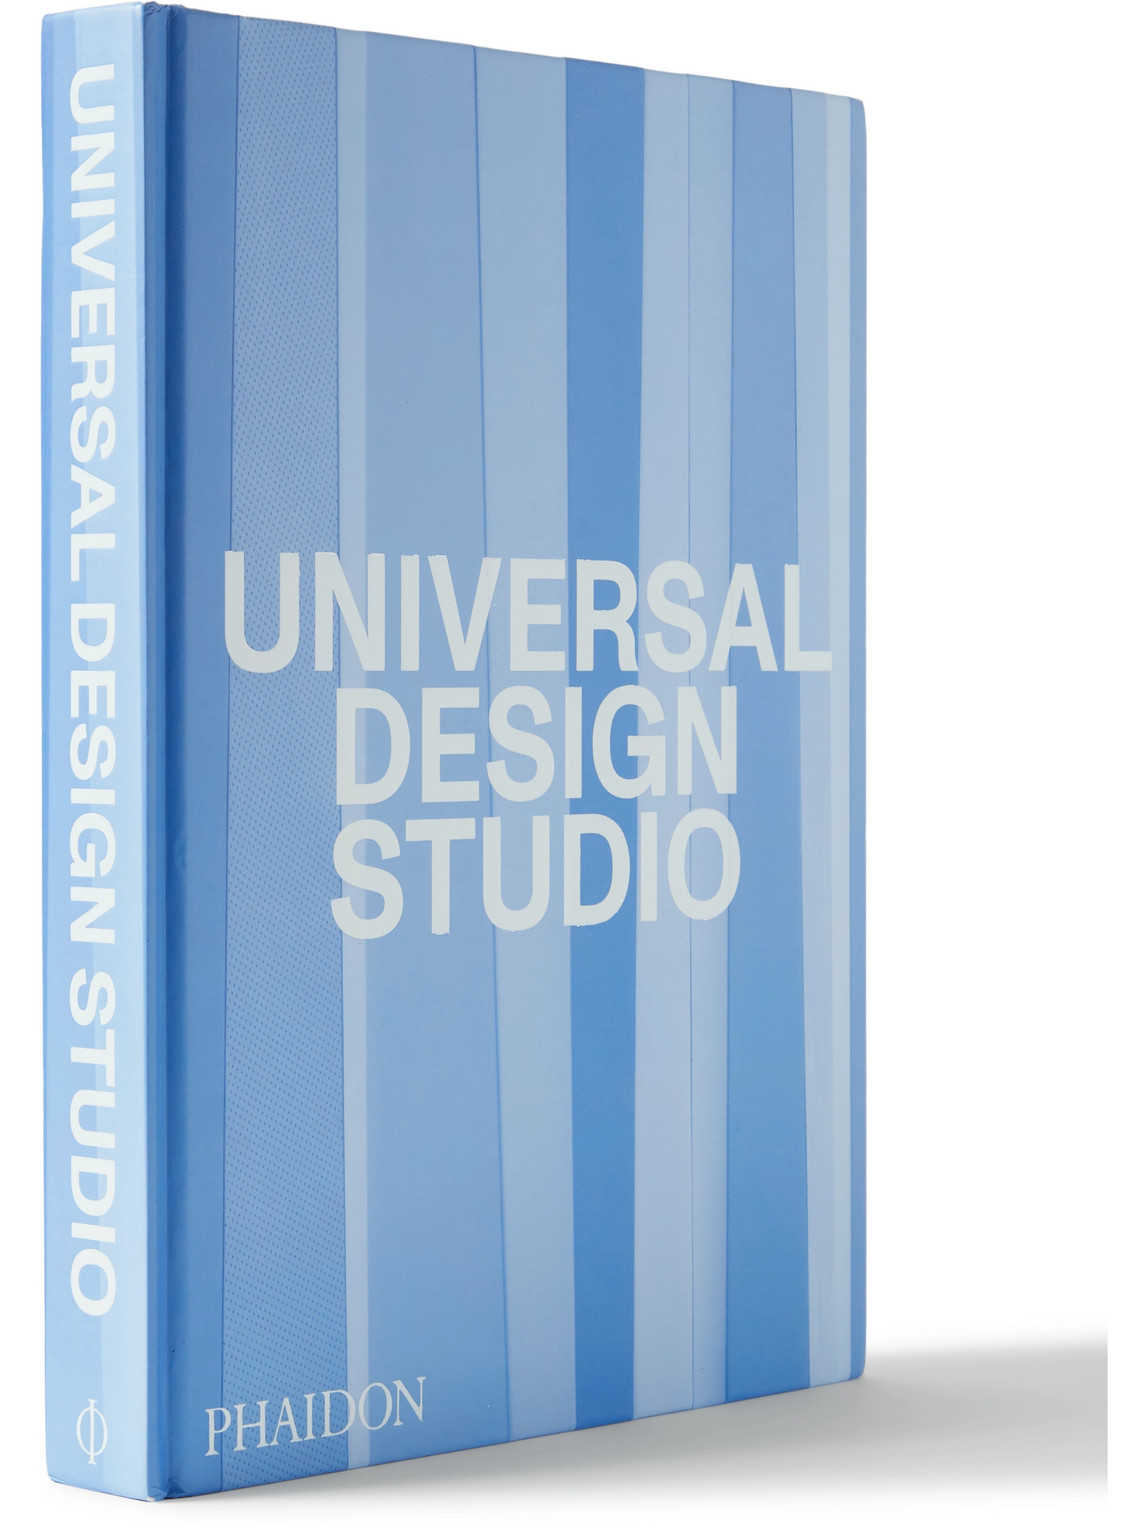 Phaidon Universal Design Studio: Inside Out Hardcover Book In Blue